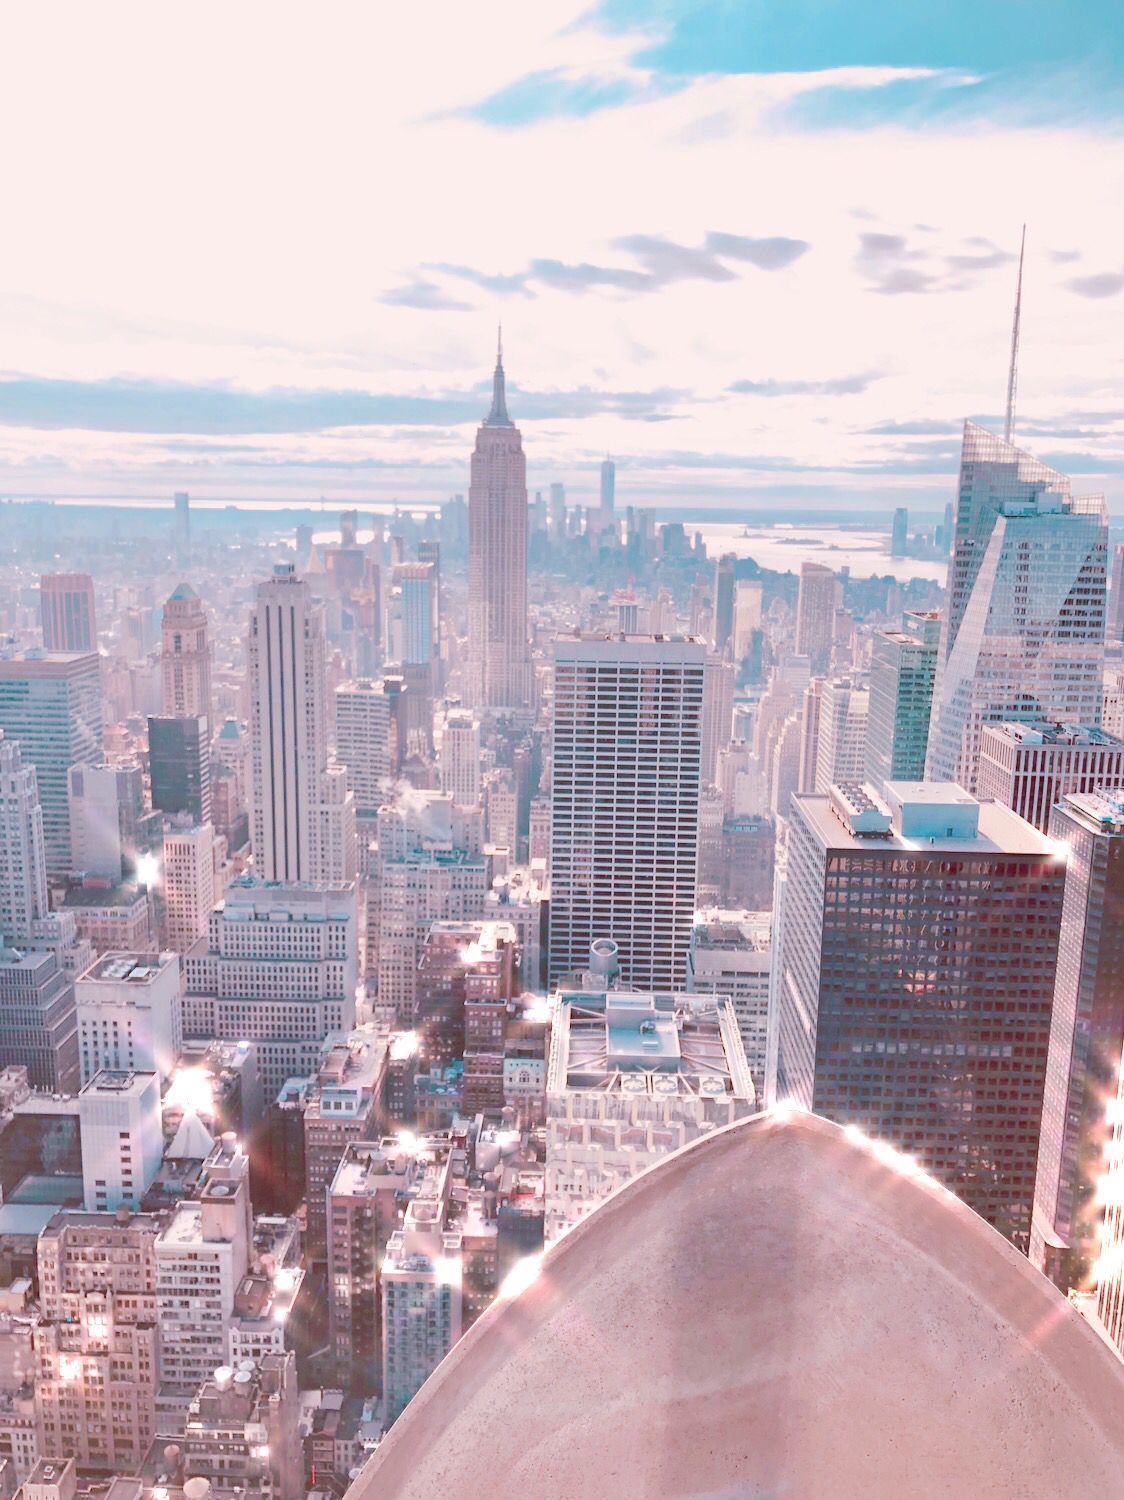 A view of the city from the top of the Empire State Building - New York